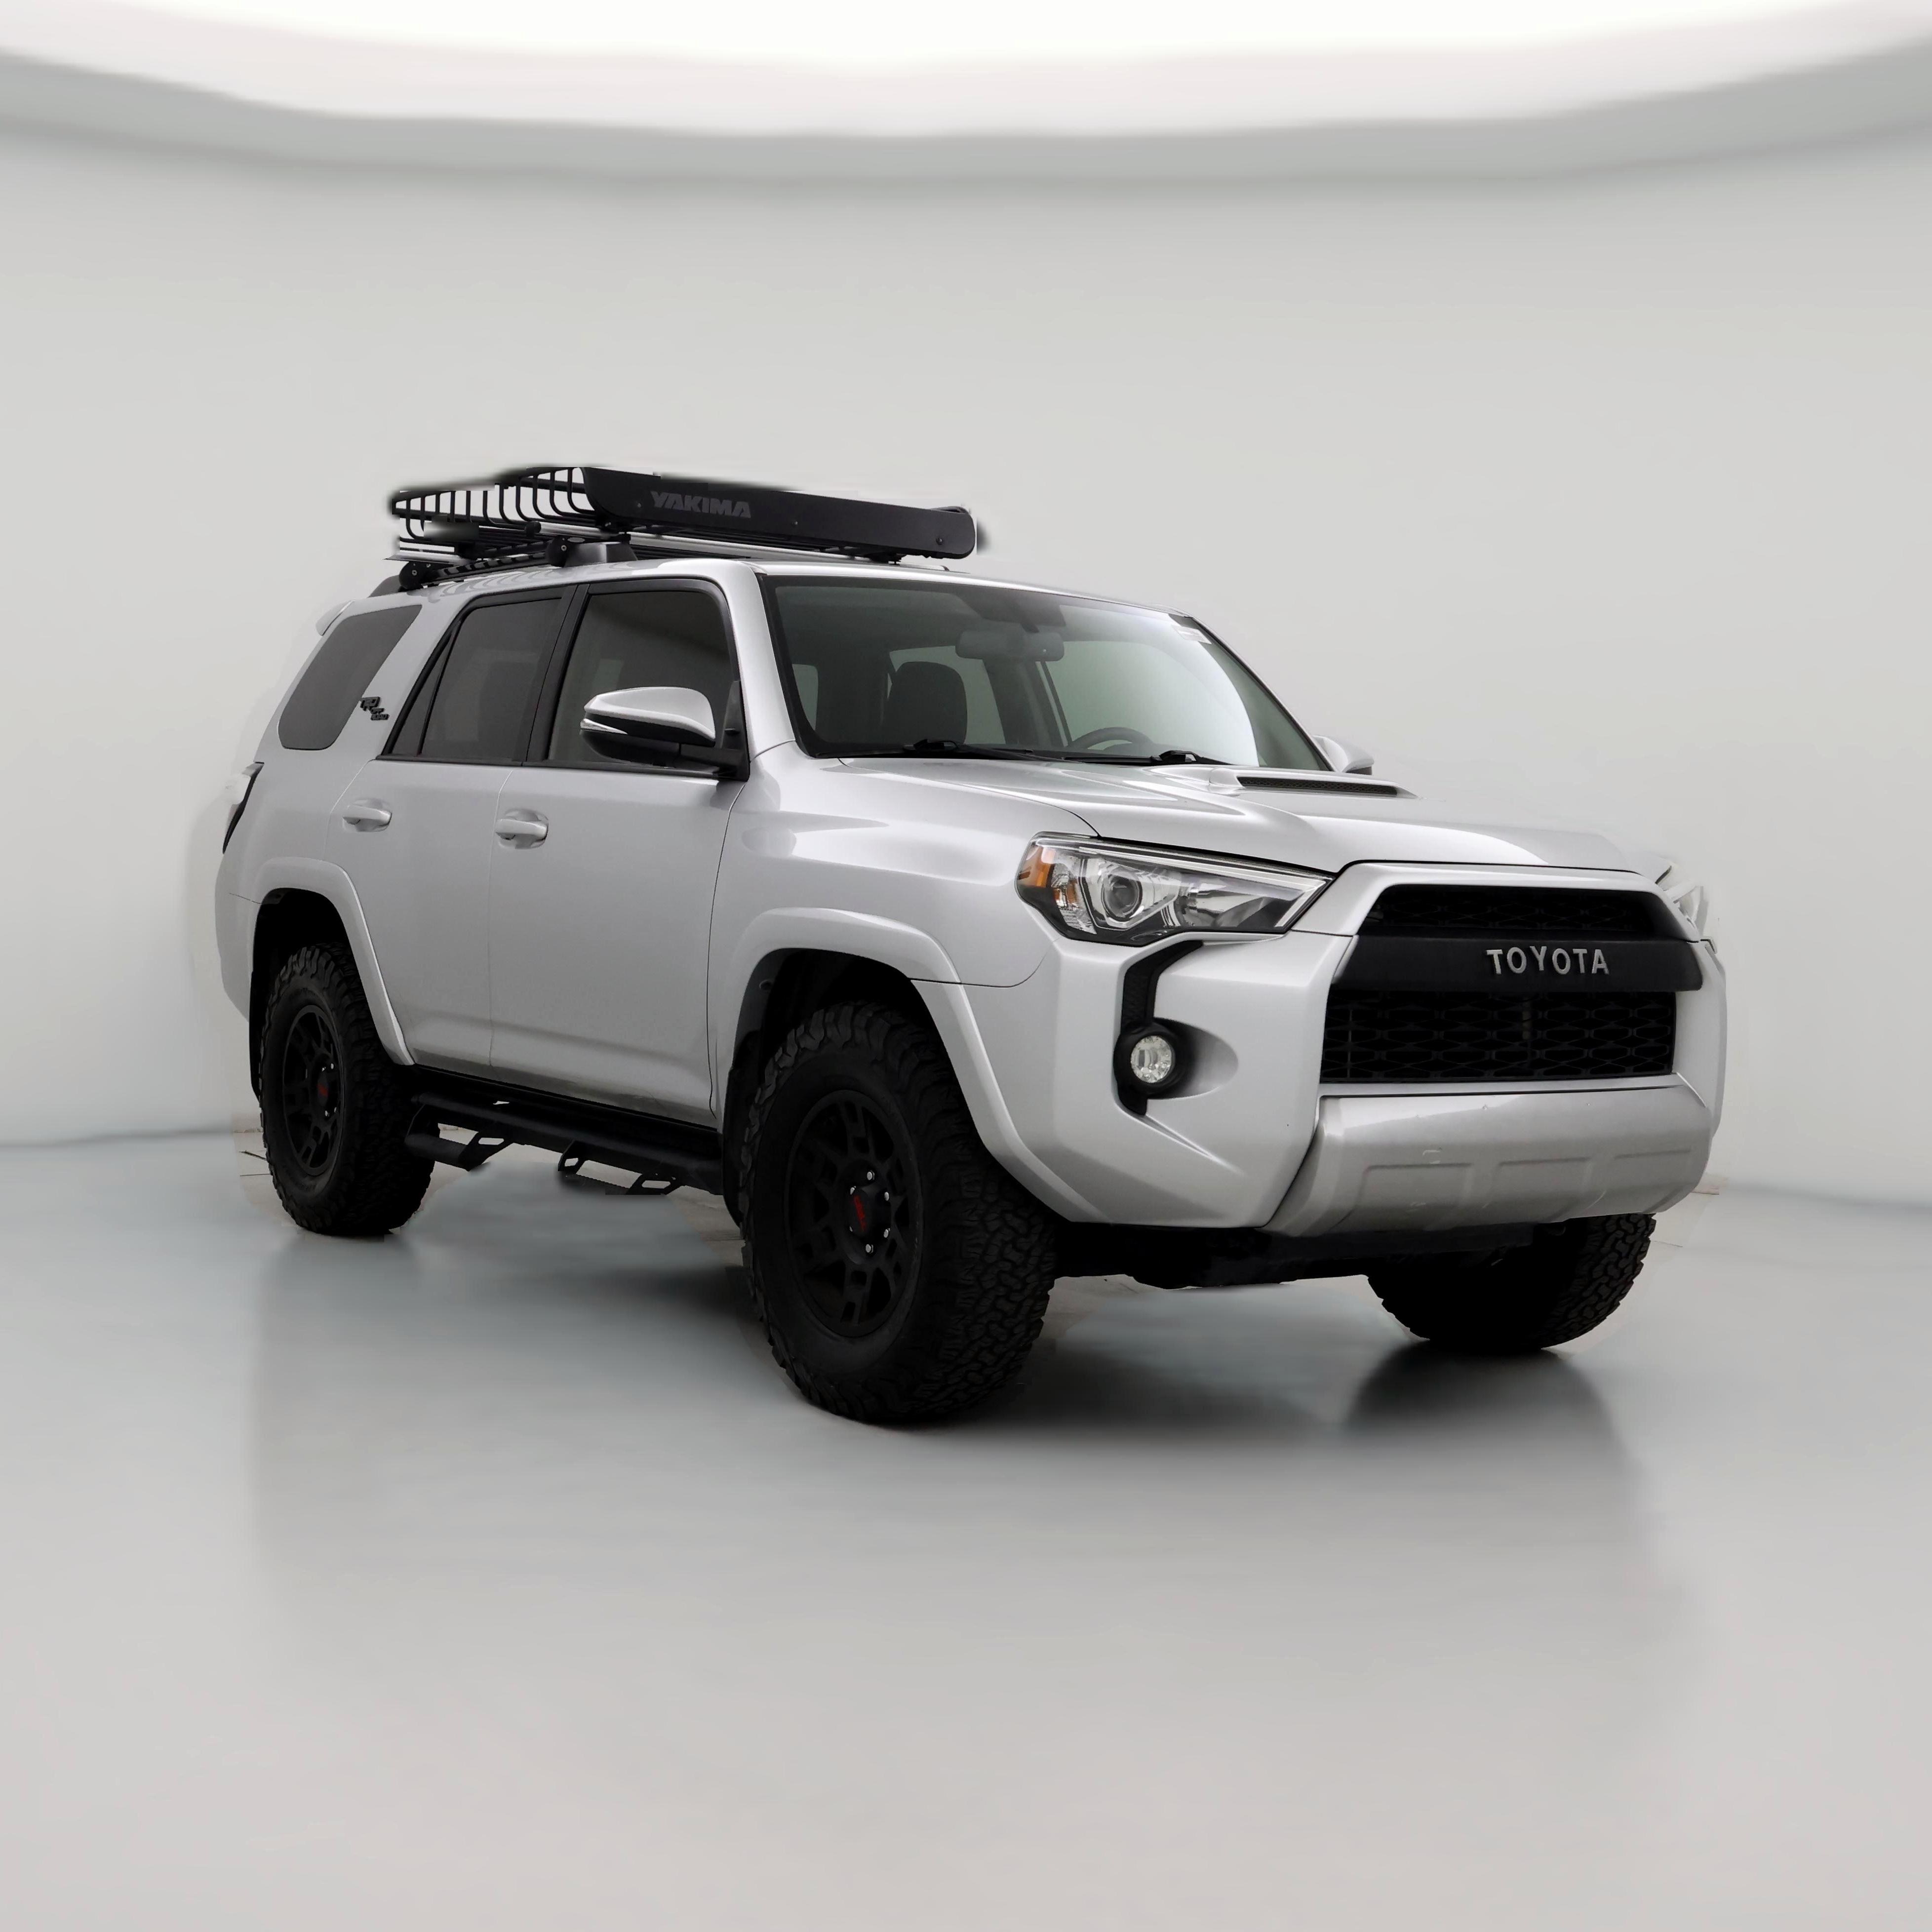 Used 2019 Toyota 4Runner for Sale